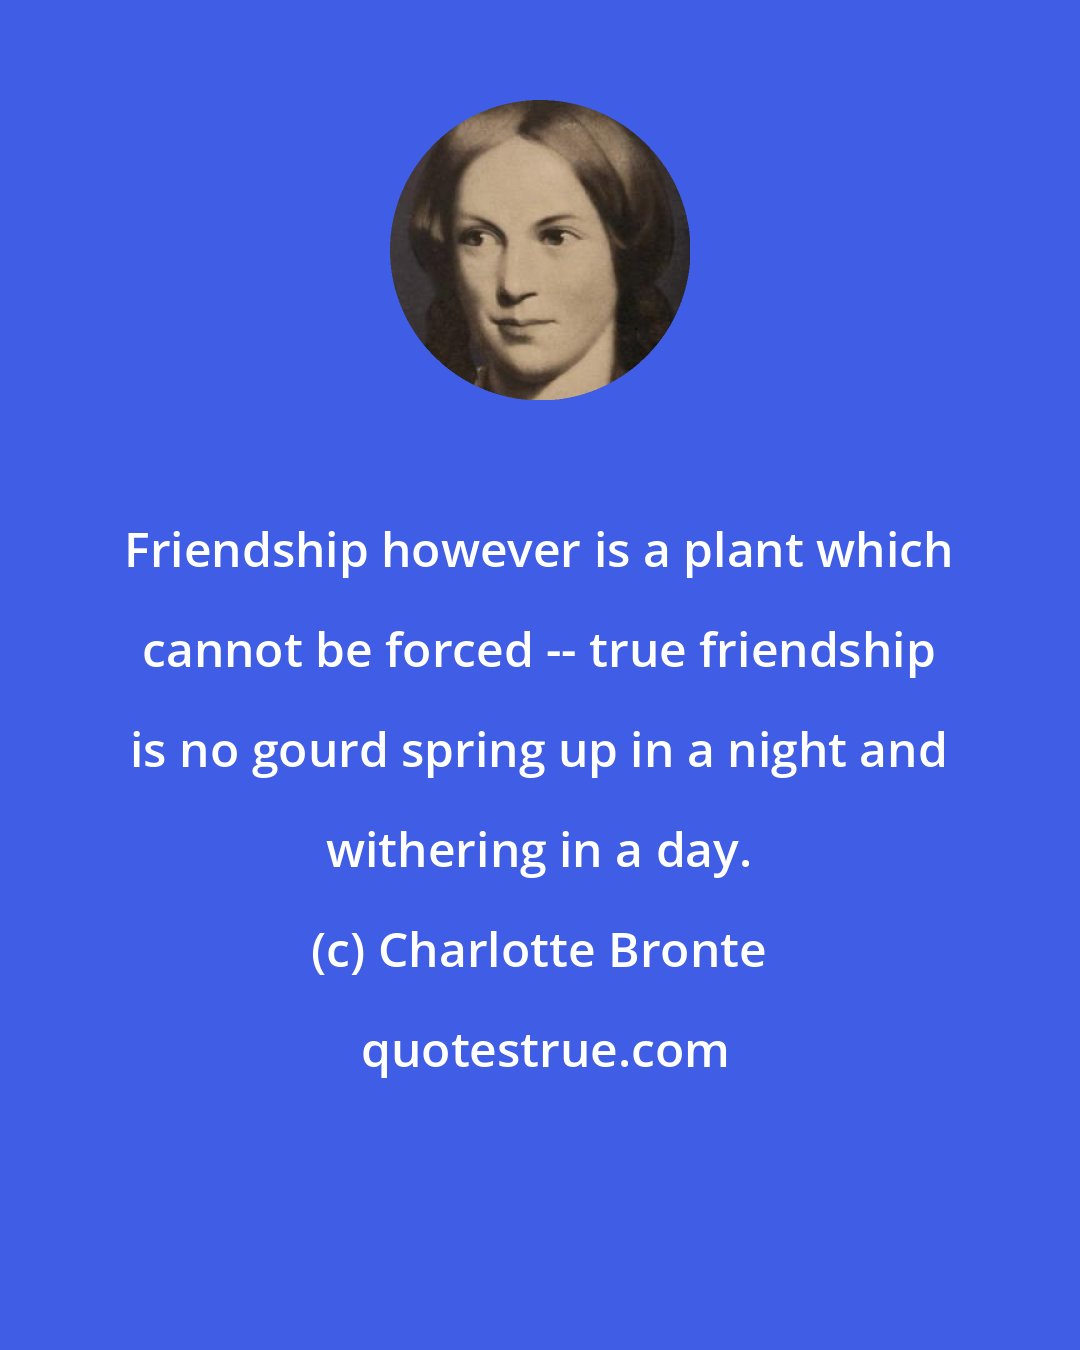 Charlotte Bronte: Friendship however is a plant which cannot be forced -- true friendship is no gourd spring up in a night and withering in a day.